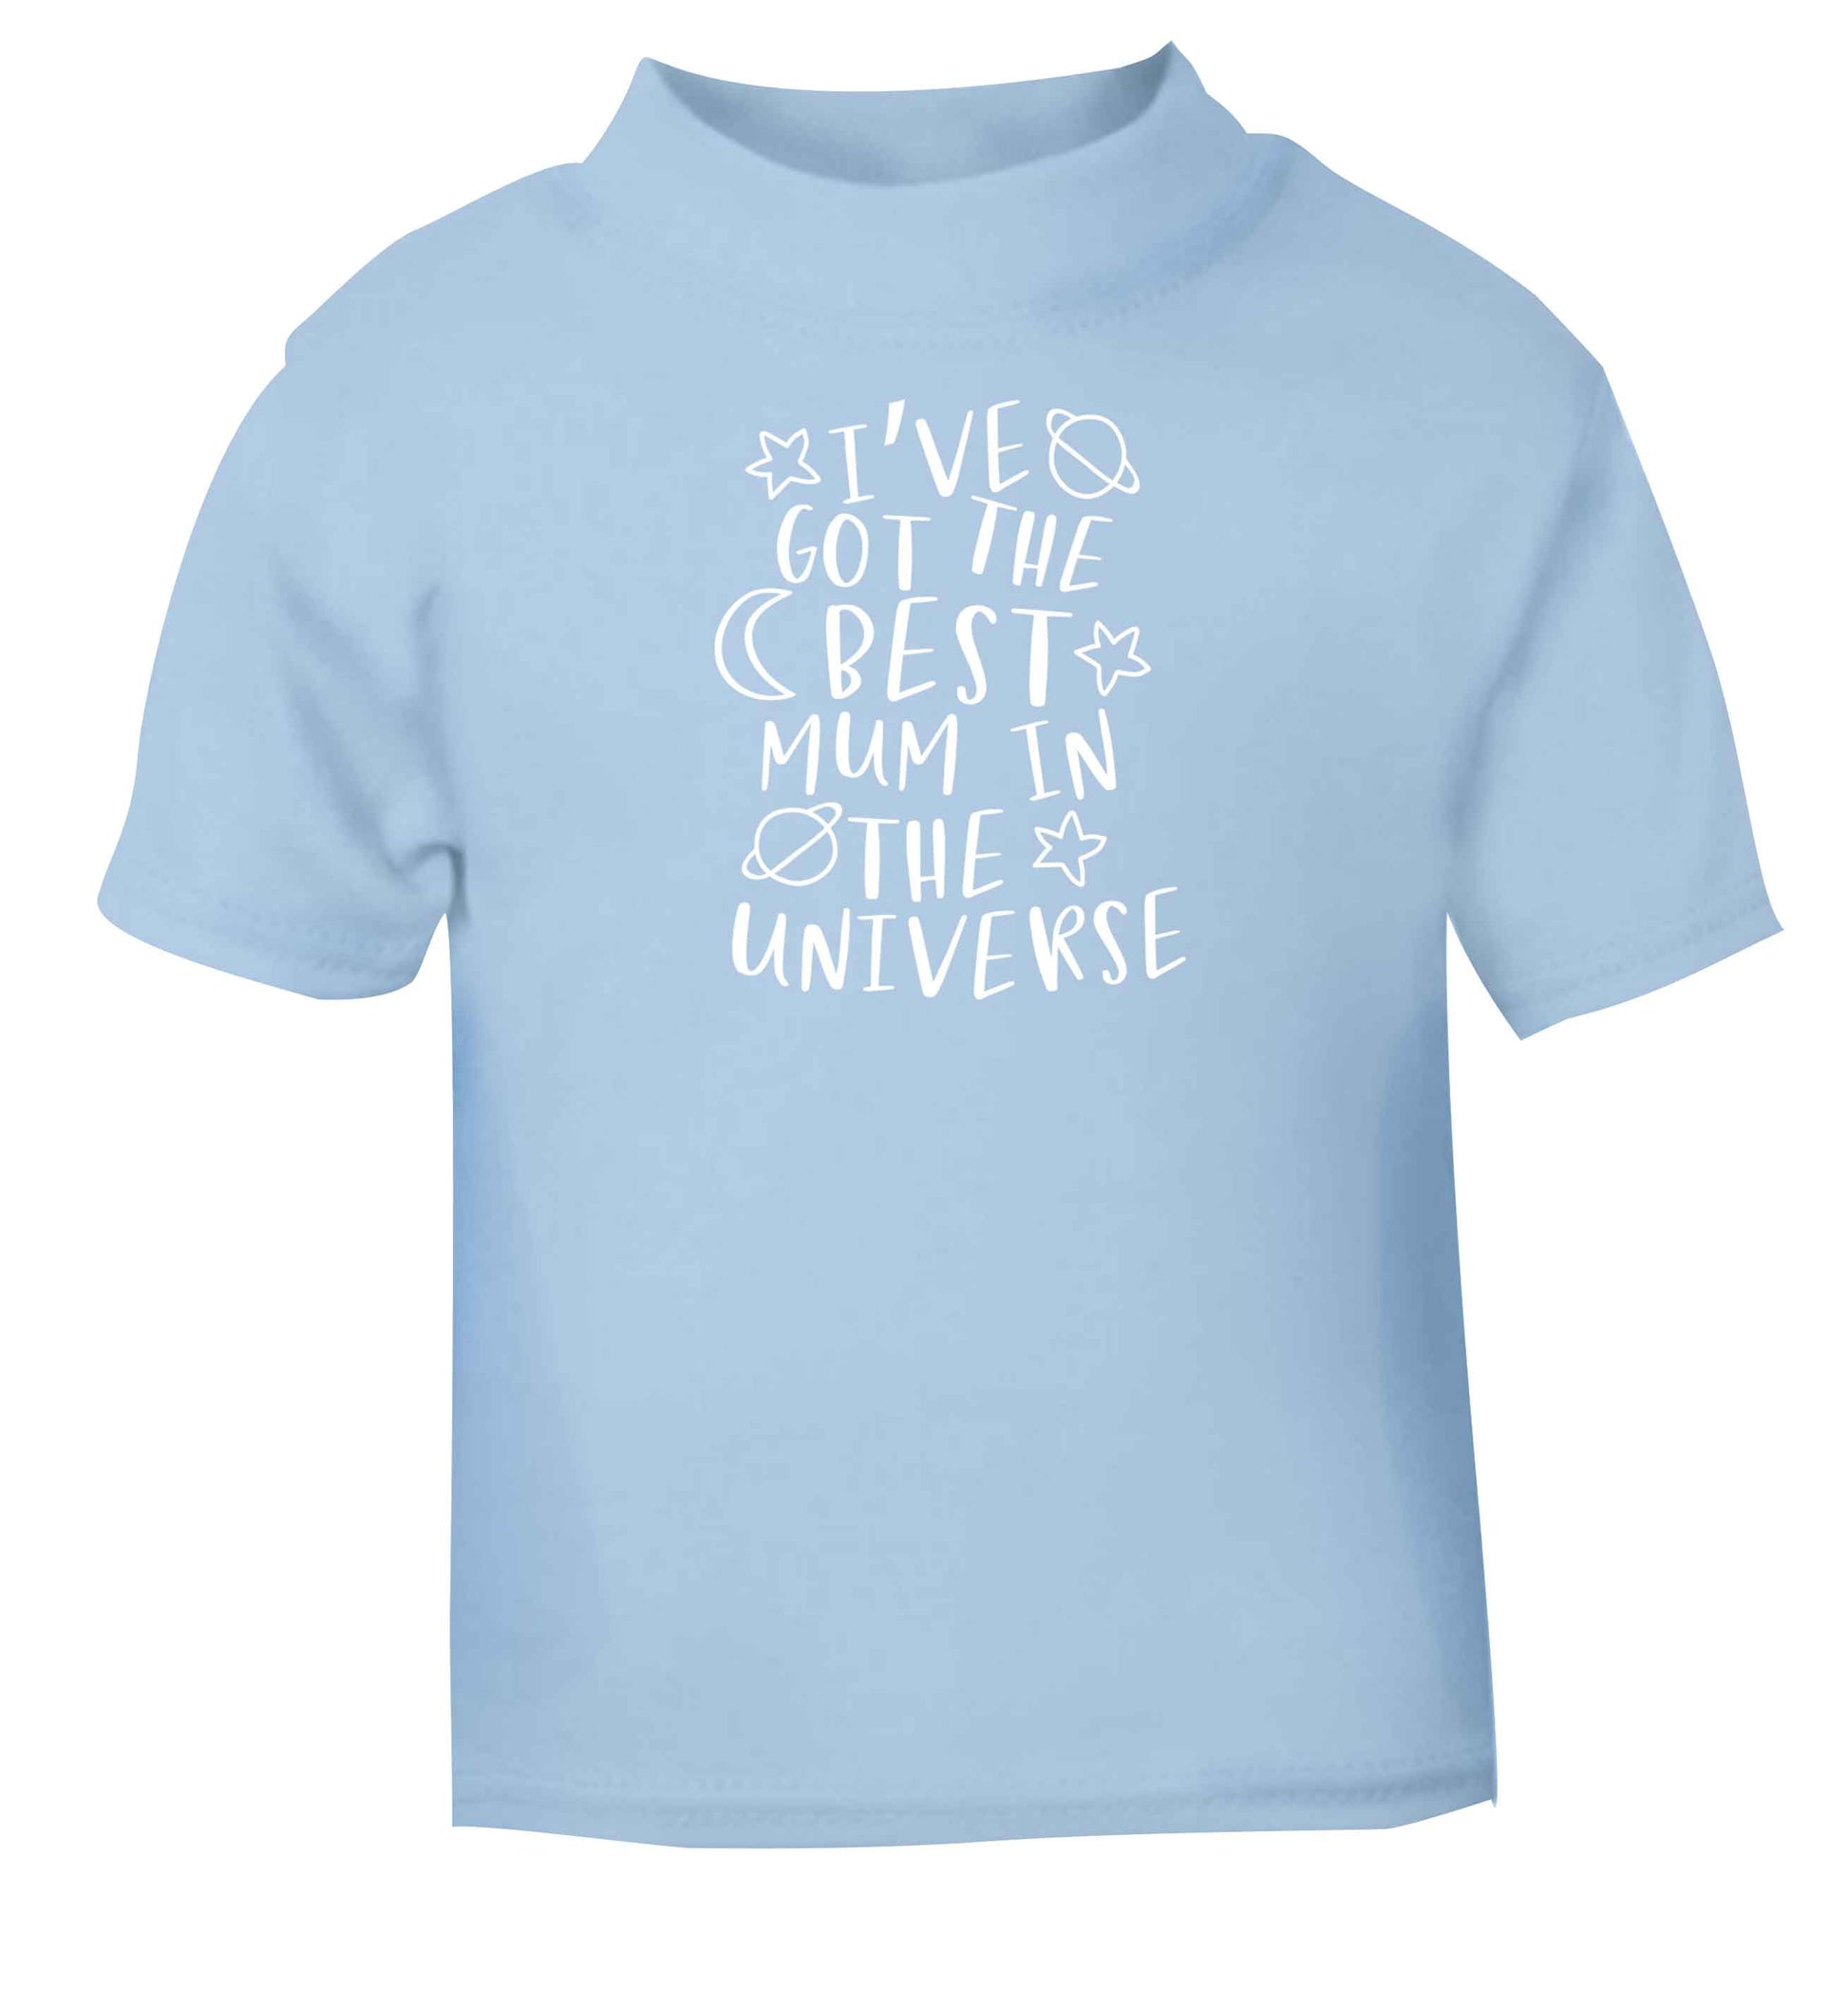 I've got the best mum in the universe light blue baby toddler Tshirt 2 Years